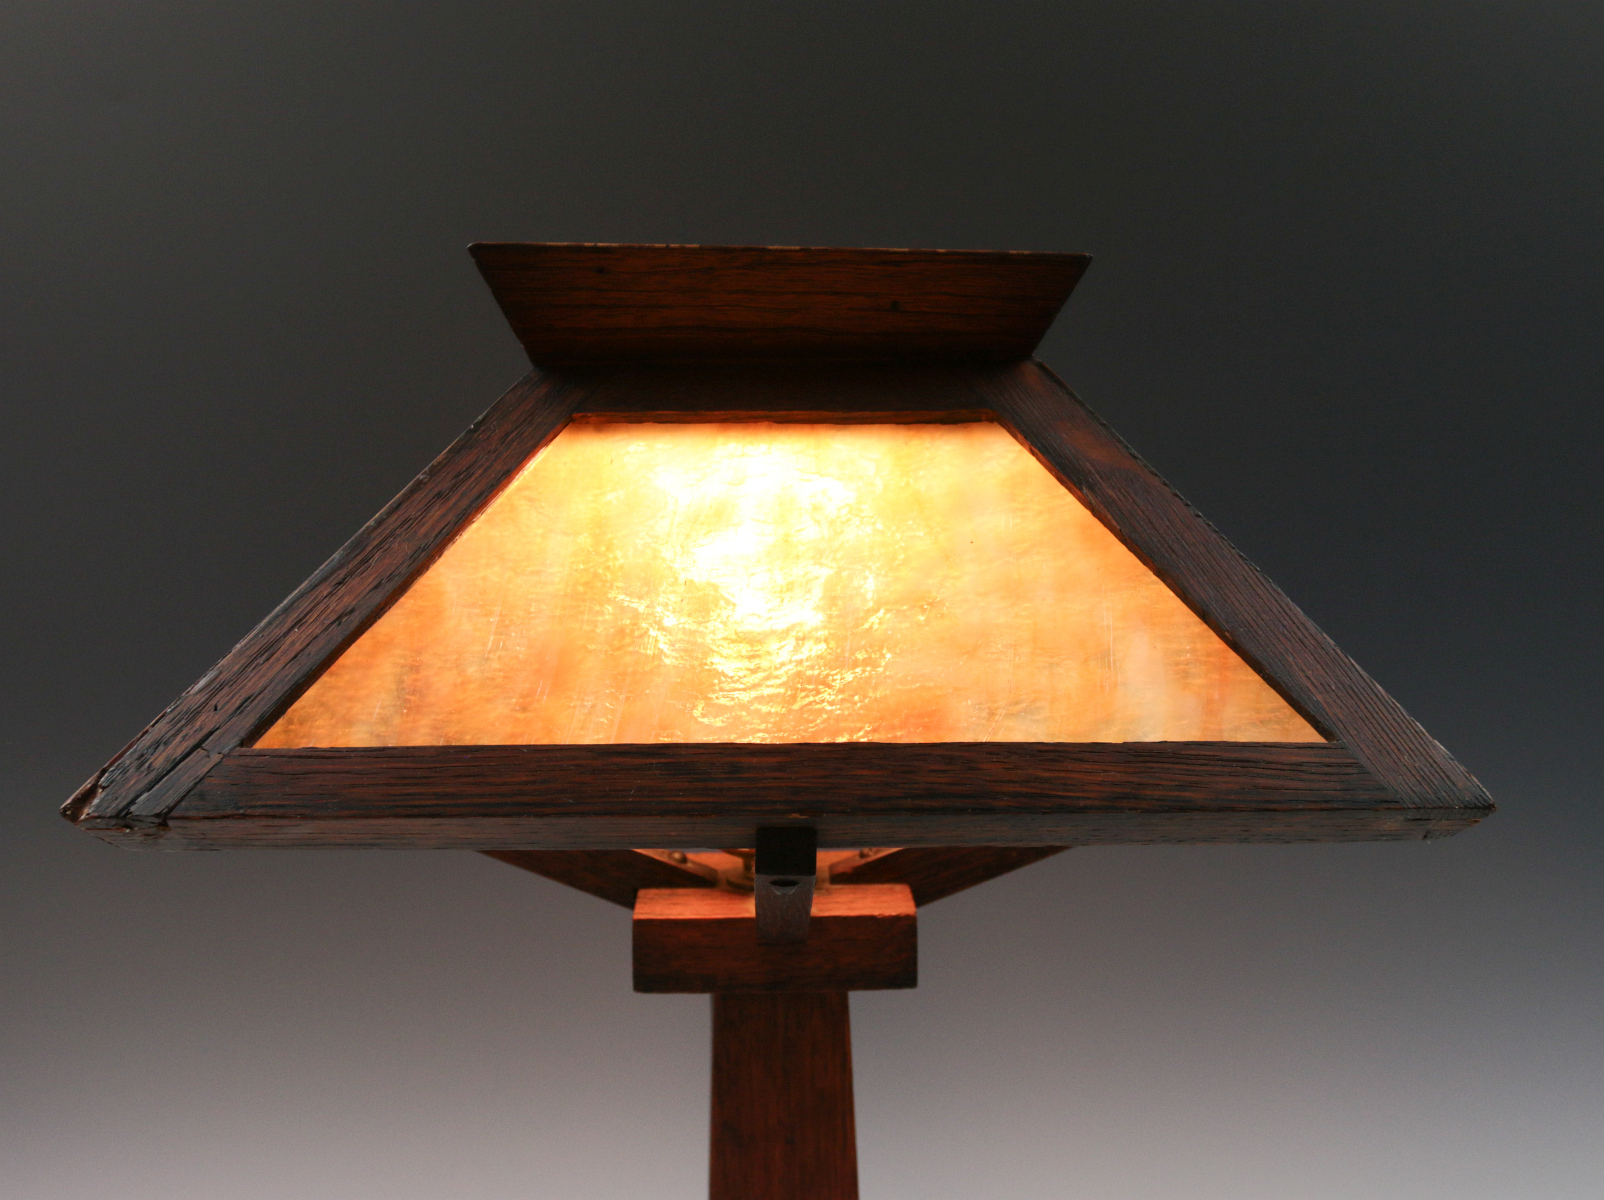 AN OAK MISSION STYLE TABLE LAMP CIRCA 1915